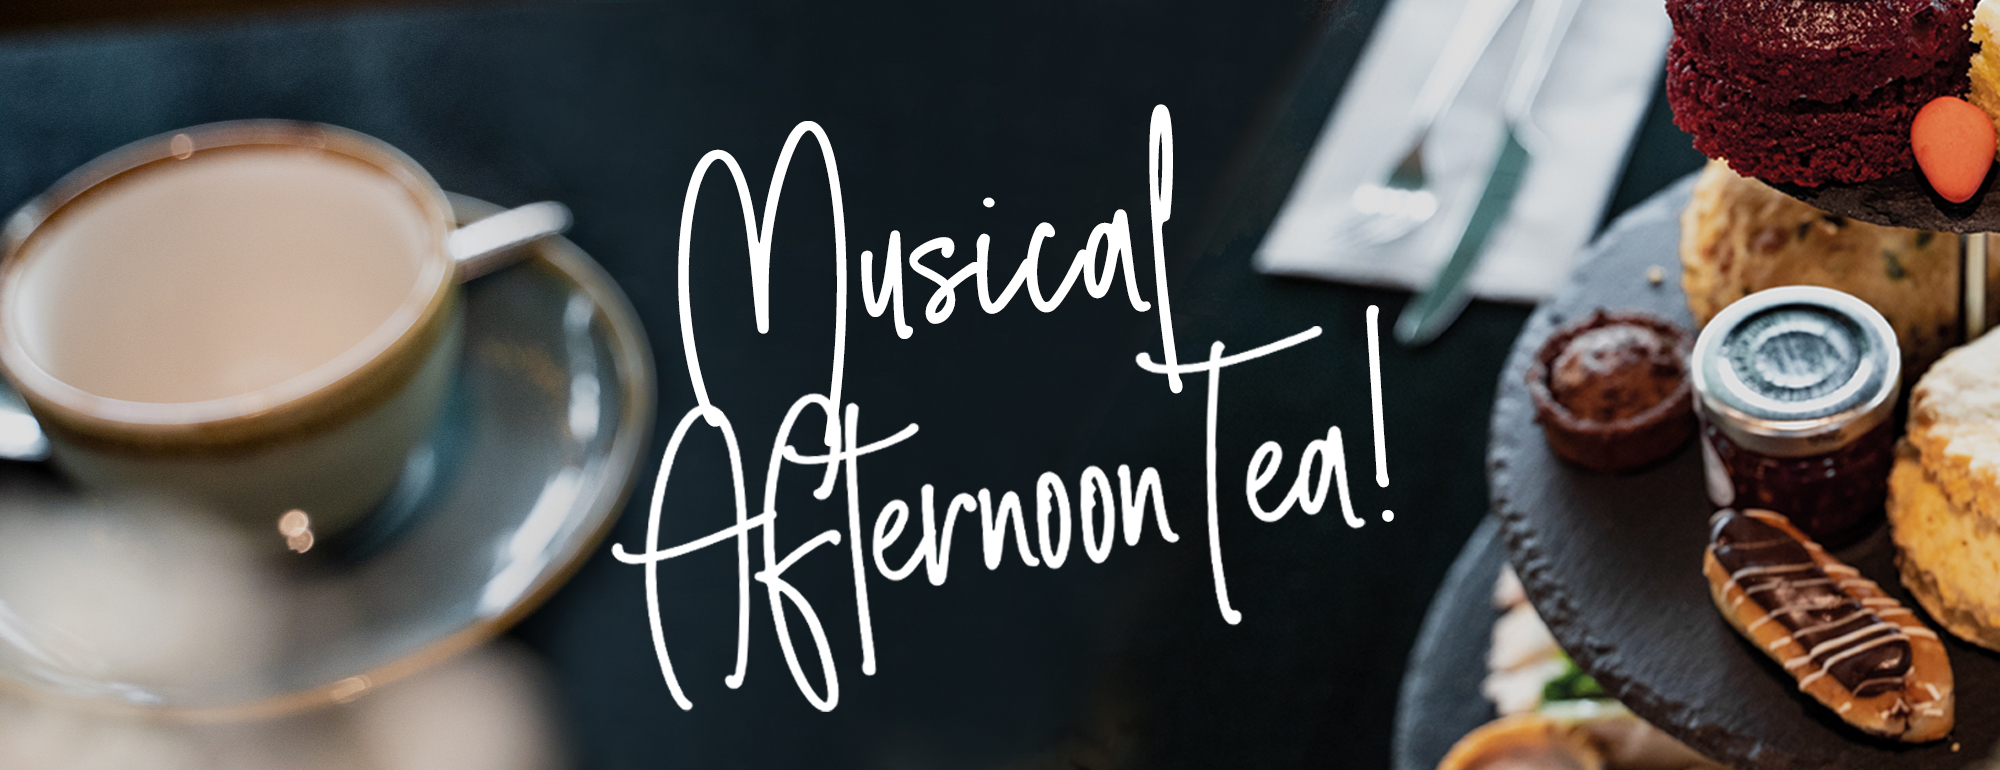 The Terrace Presents: Musical Afternoon Tea | Aberdeen Performing Arts